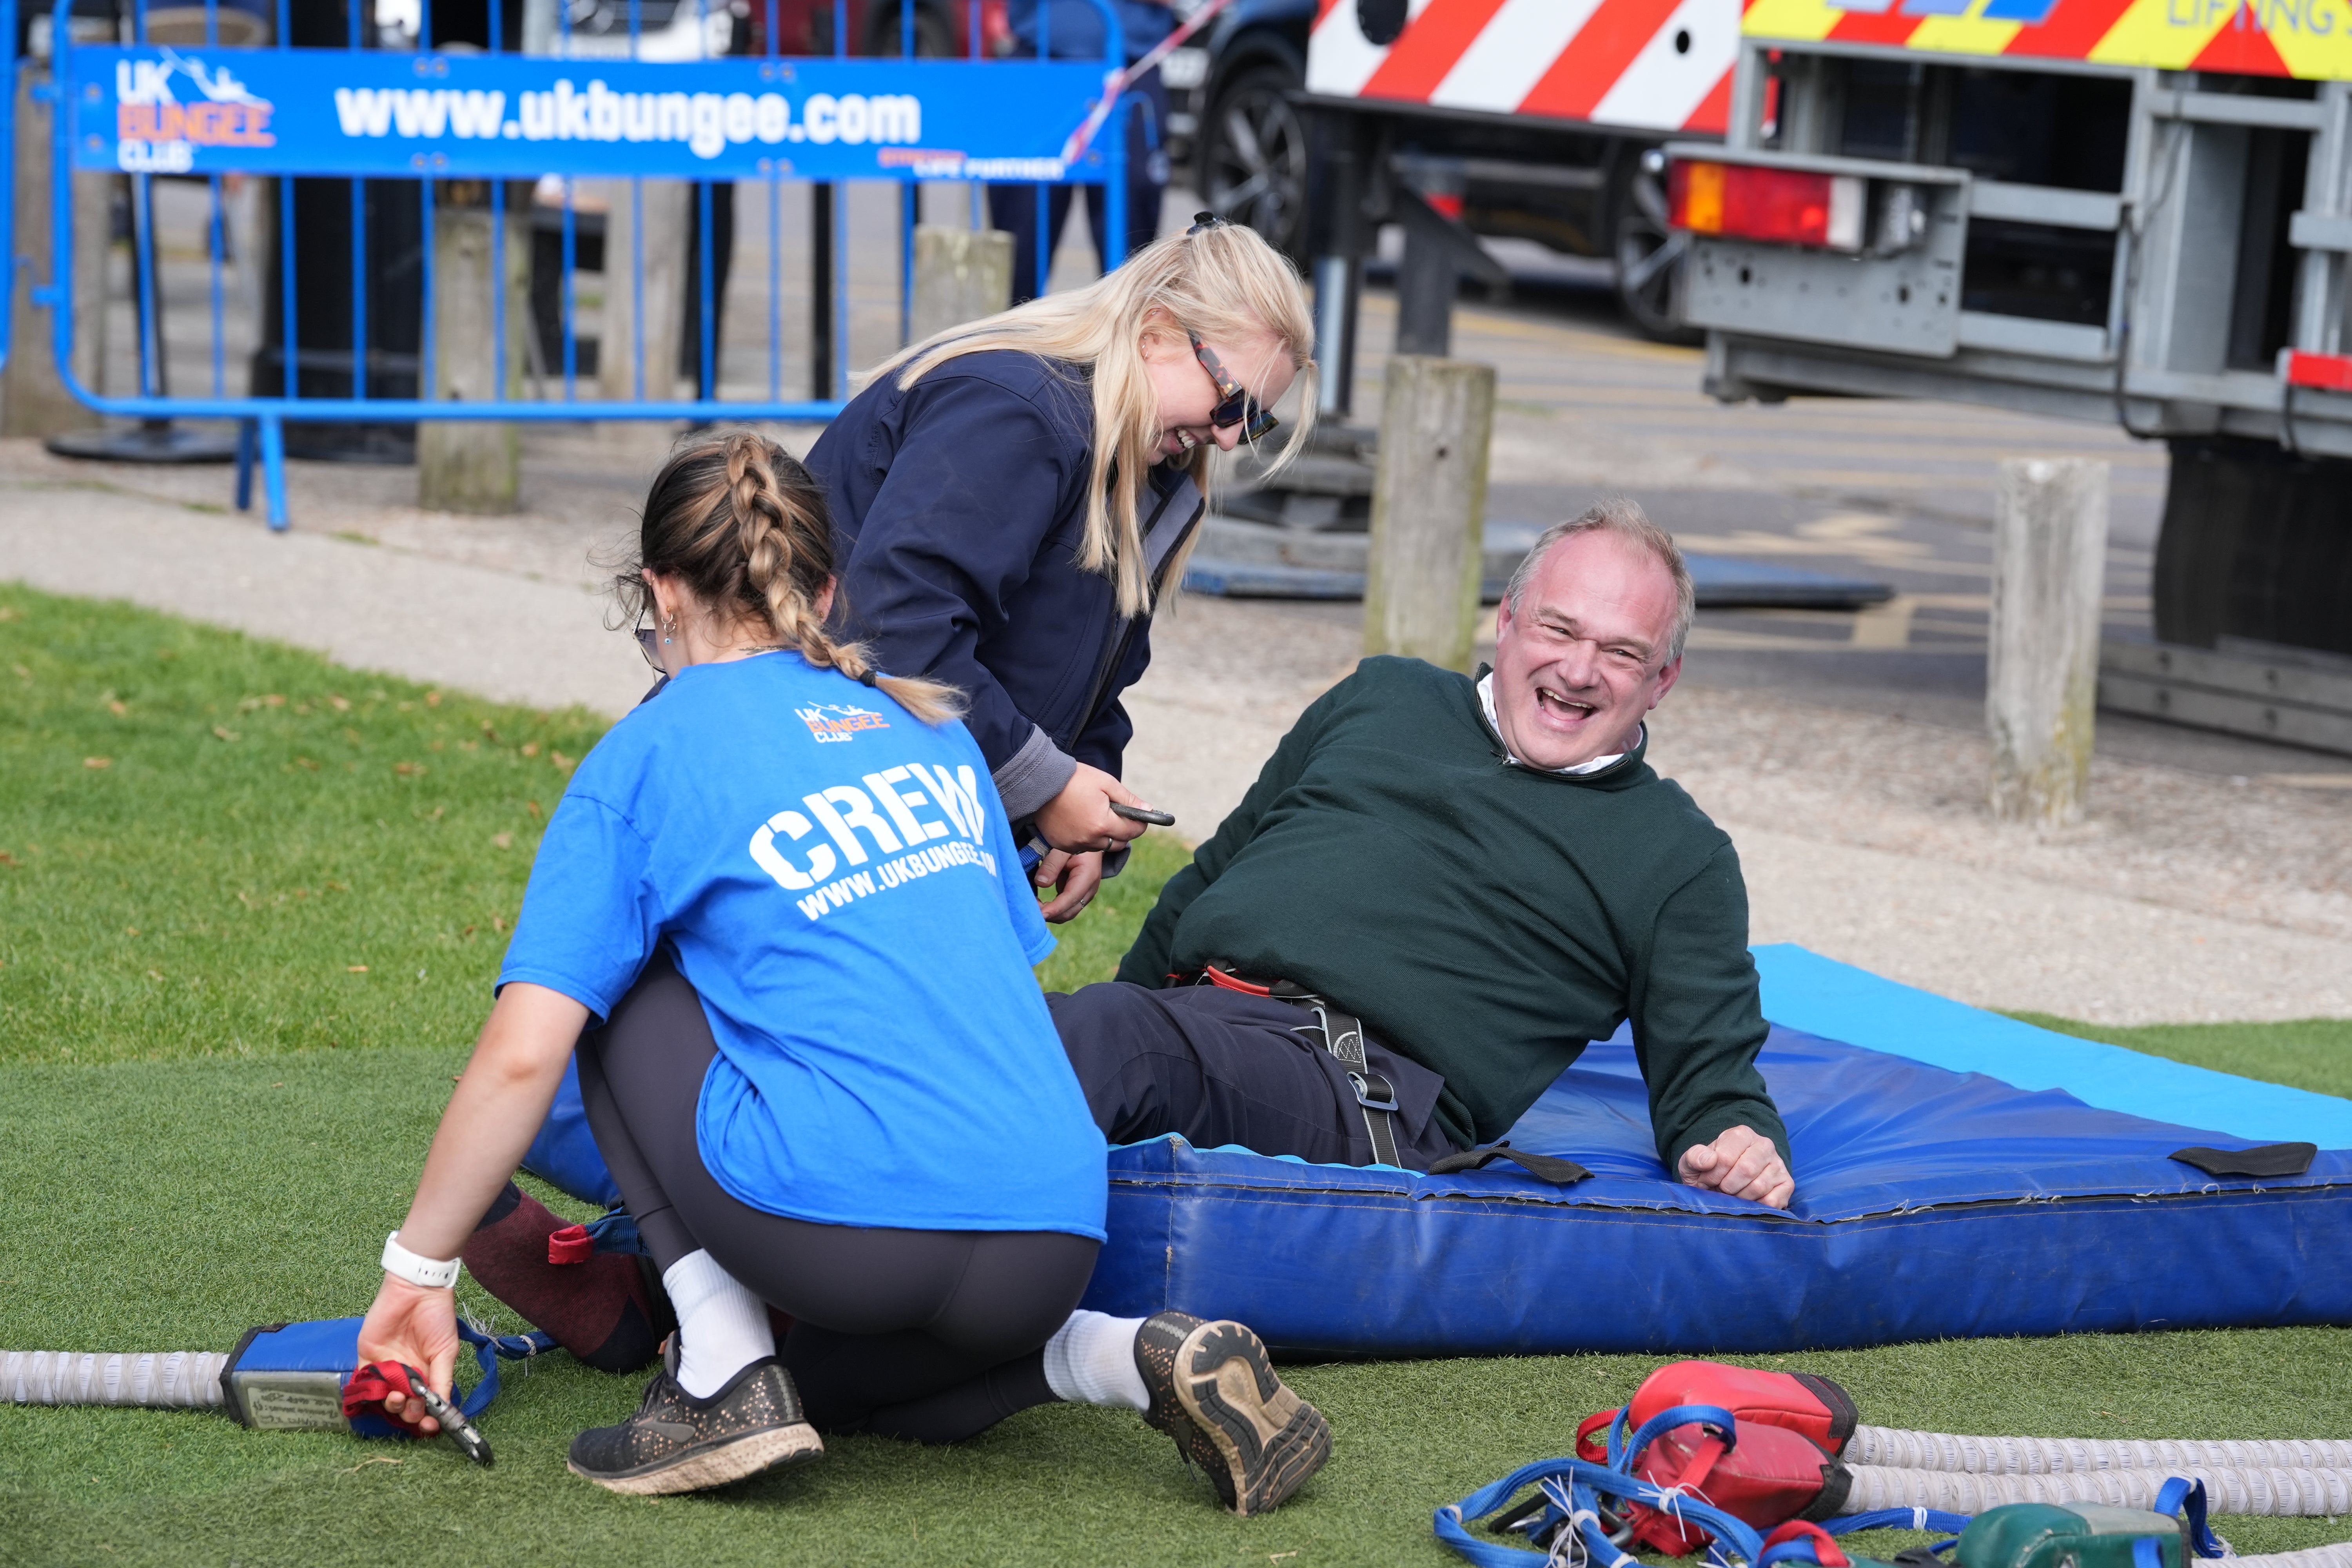 Liberal Democrat leader Sir Ed Davey after taking part in a bungee jump during a visit to Eastbourne Borough Football Club in East Sussex (Gareth Fuller/PA)